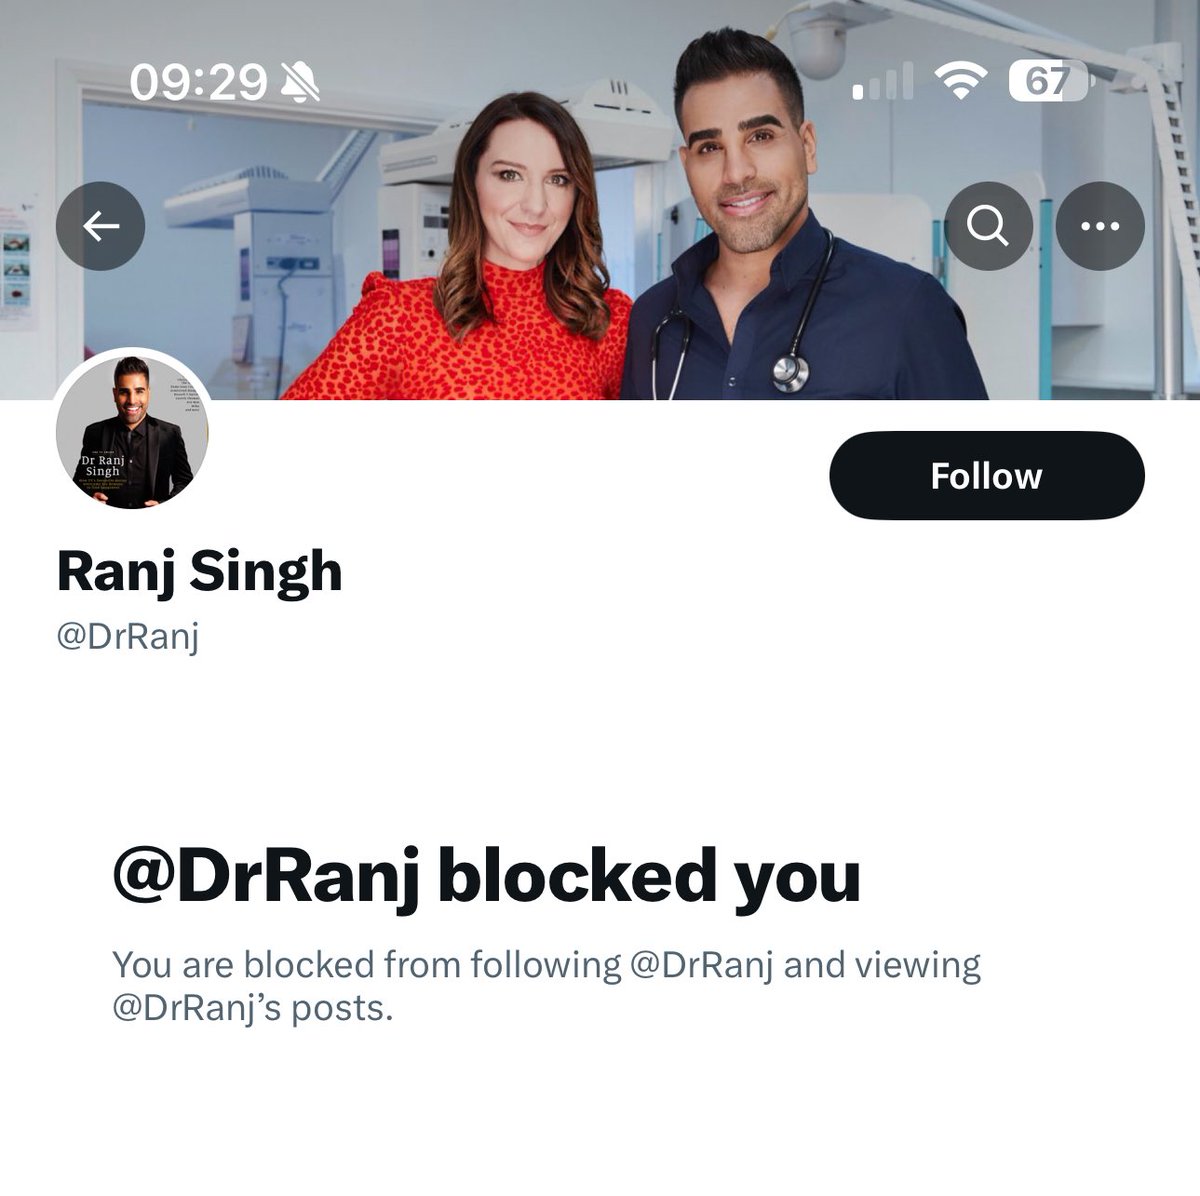 Blocked because they can’t handle what they’ve done. Each one of these fake celebrity “experts” coerced people to take mRNA vaccines. We know these vaccines have led DIRECTLY to multiple injuries and deaths. Scum isn’t a strong enough word.